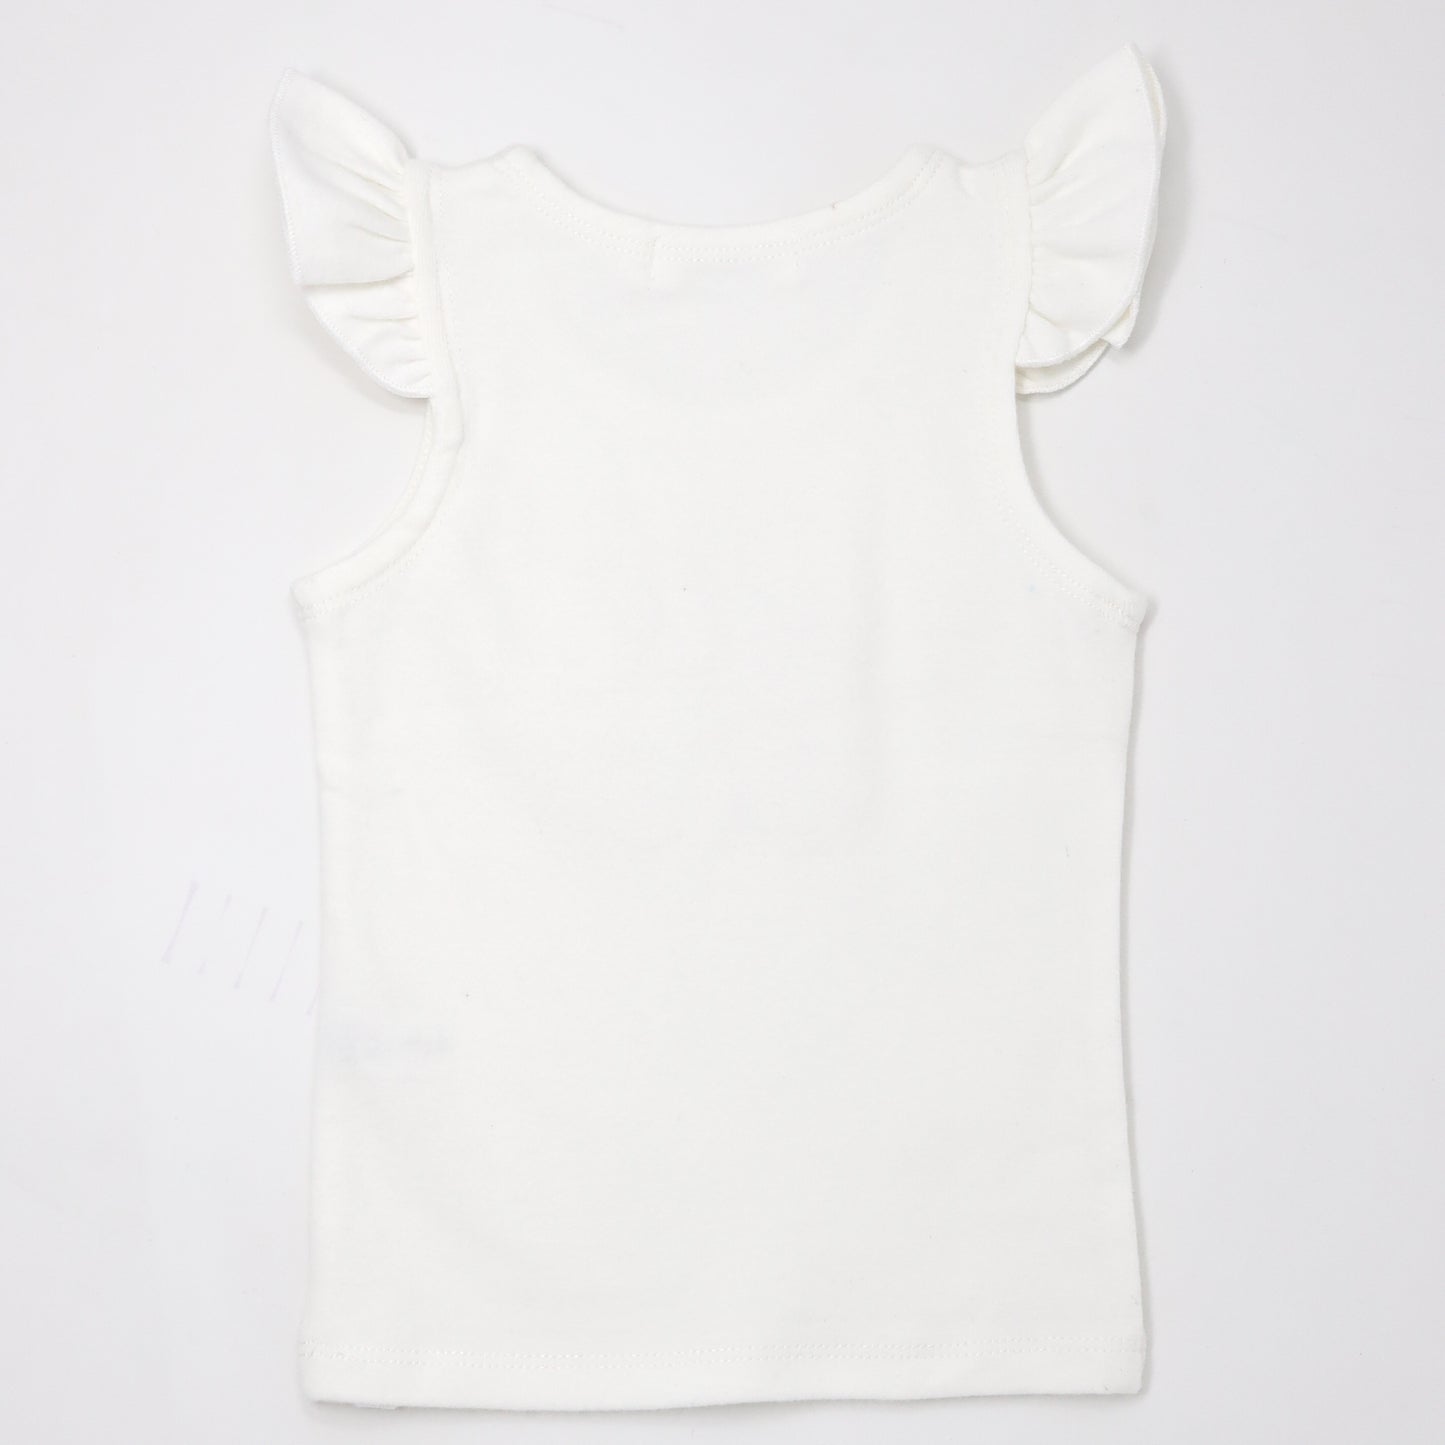 "lil sis" Pink Embroidered Cotton Baby Rib FS Tank